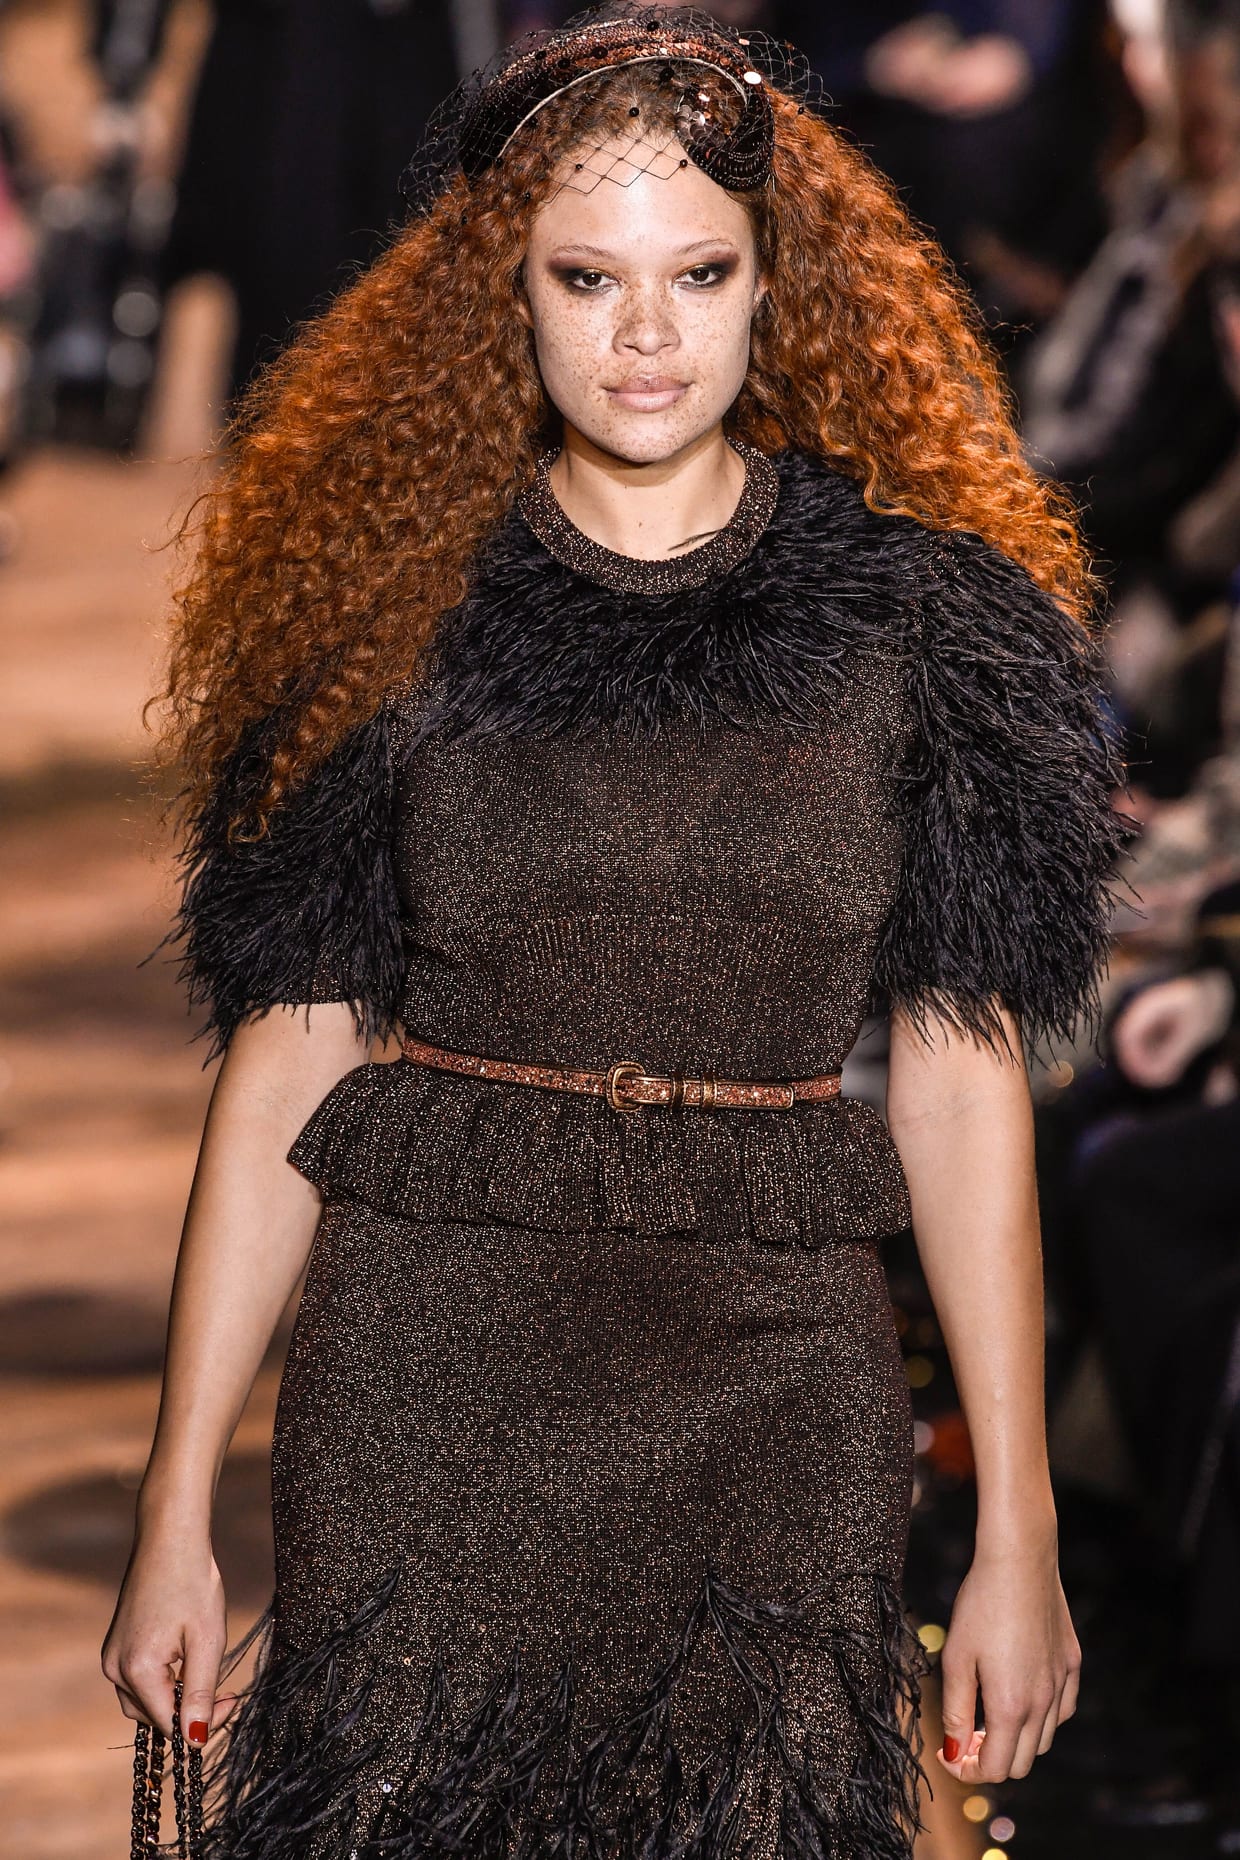 A model at the Michael Kors Fall/Winter fashion show on Feb. 13, 2019.